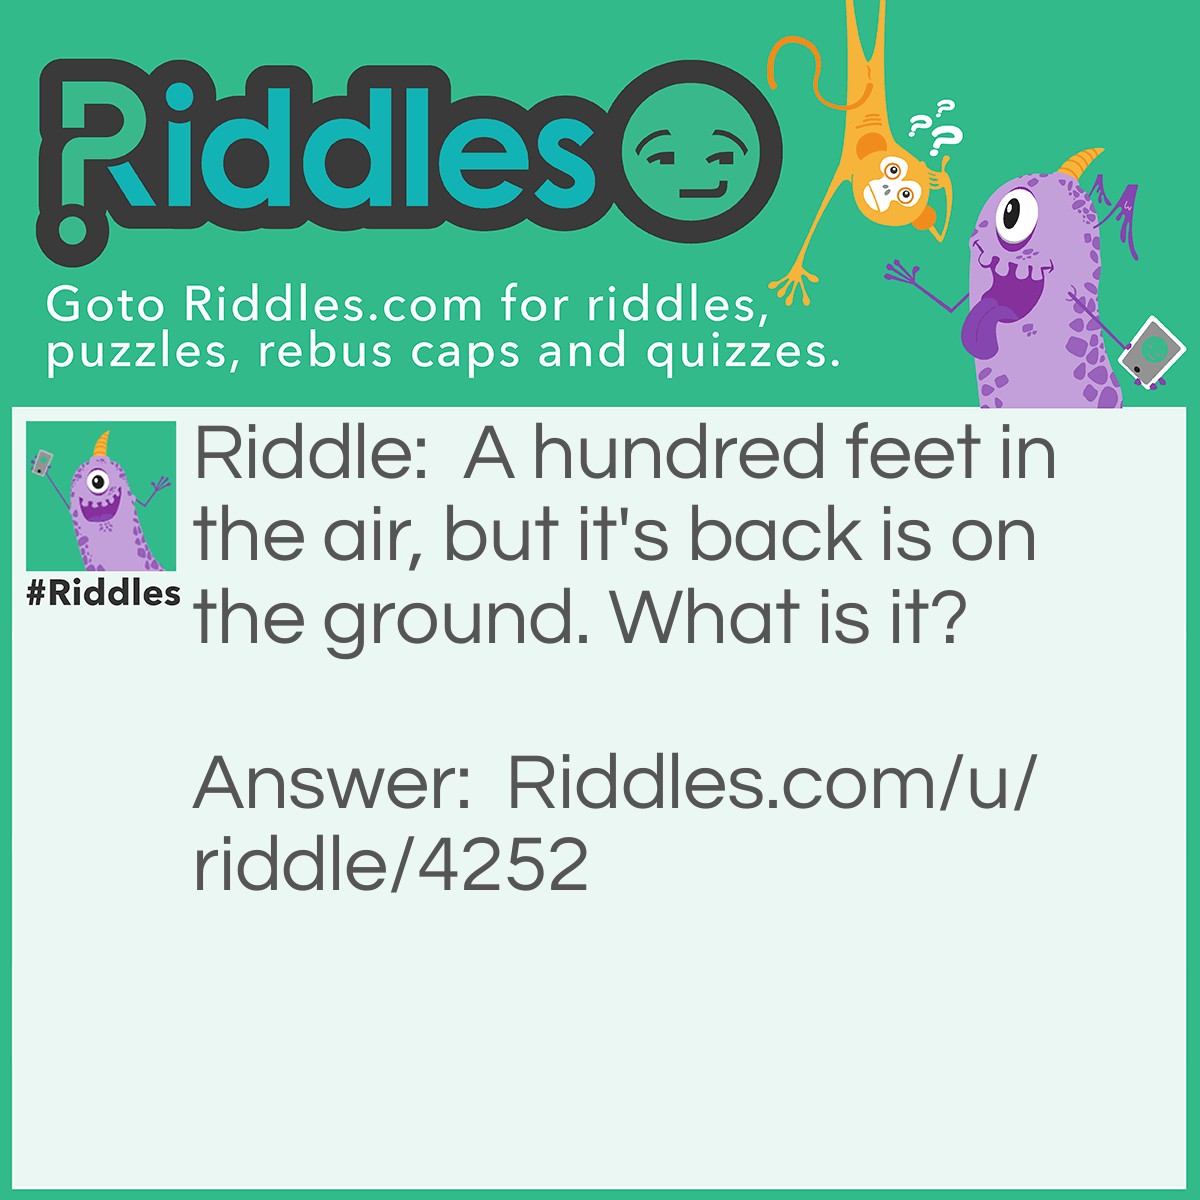 Riddle: A hundred feet in the air, but it's back is on the ground. What is it? Answer: A centipede flipped over!